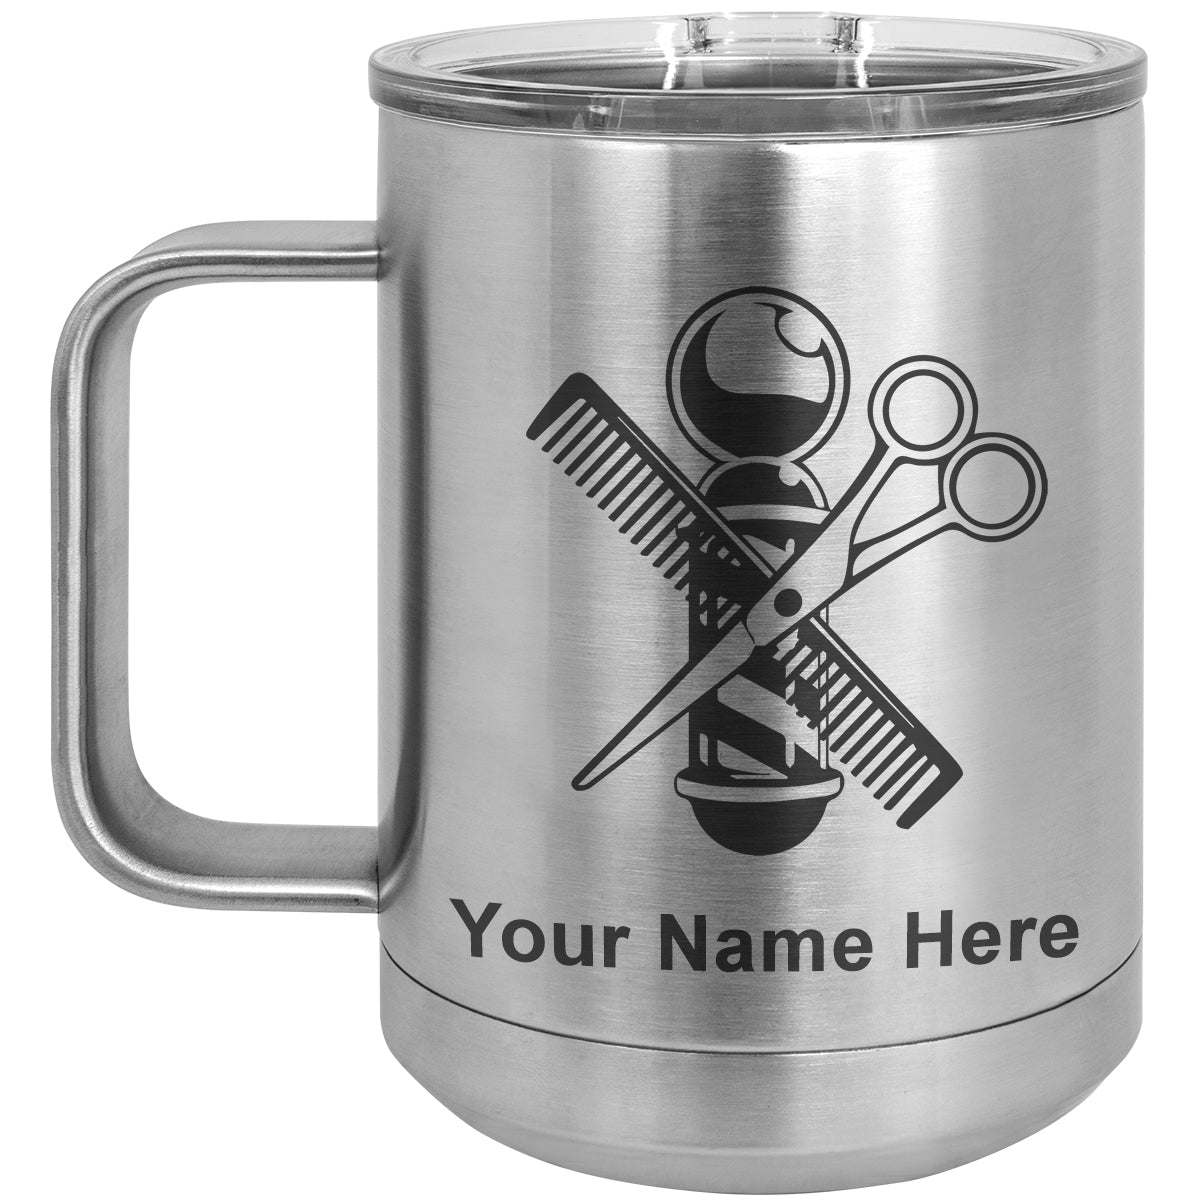 15oz Vacuum Insulated Coffee Mug, Barber Shop Pole, Personalized Engraving Included